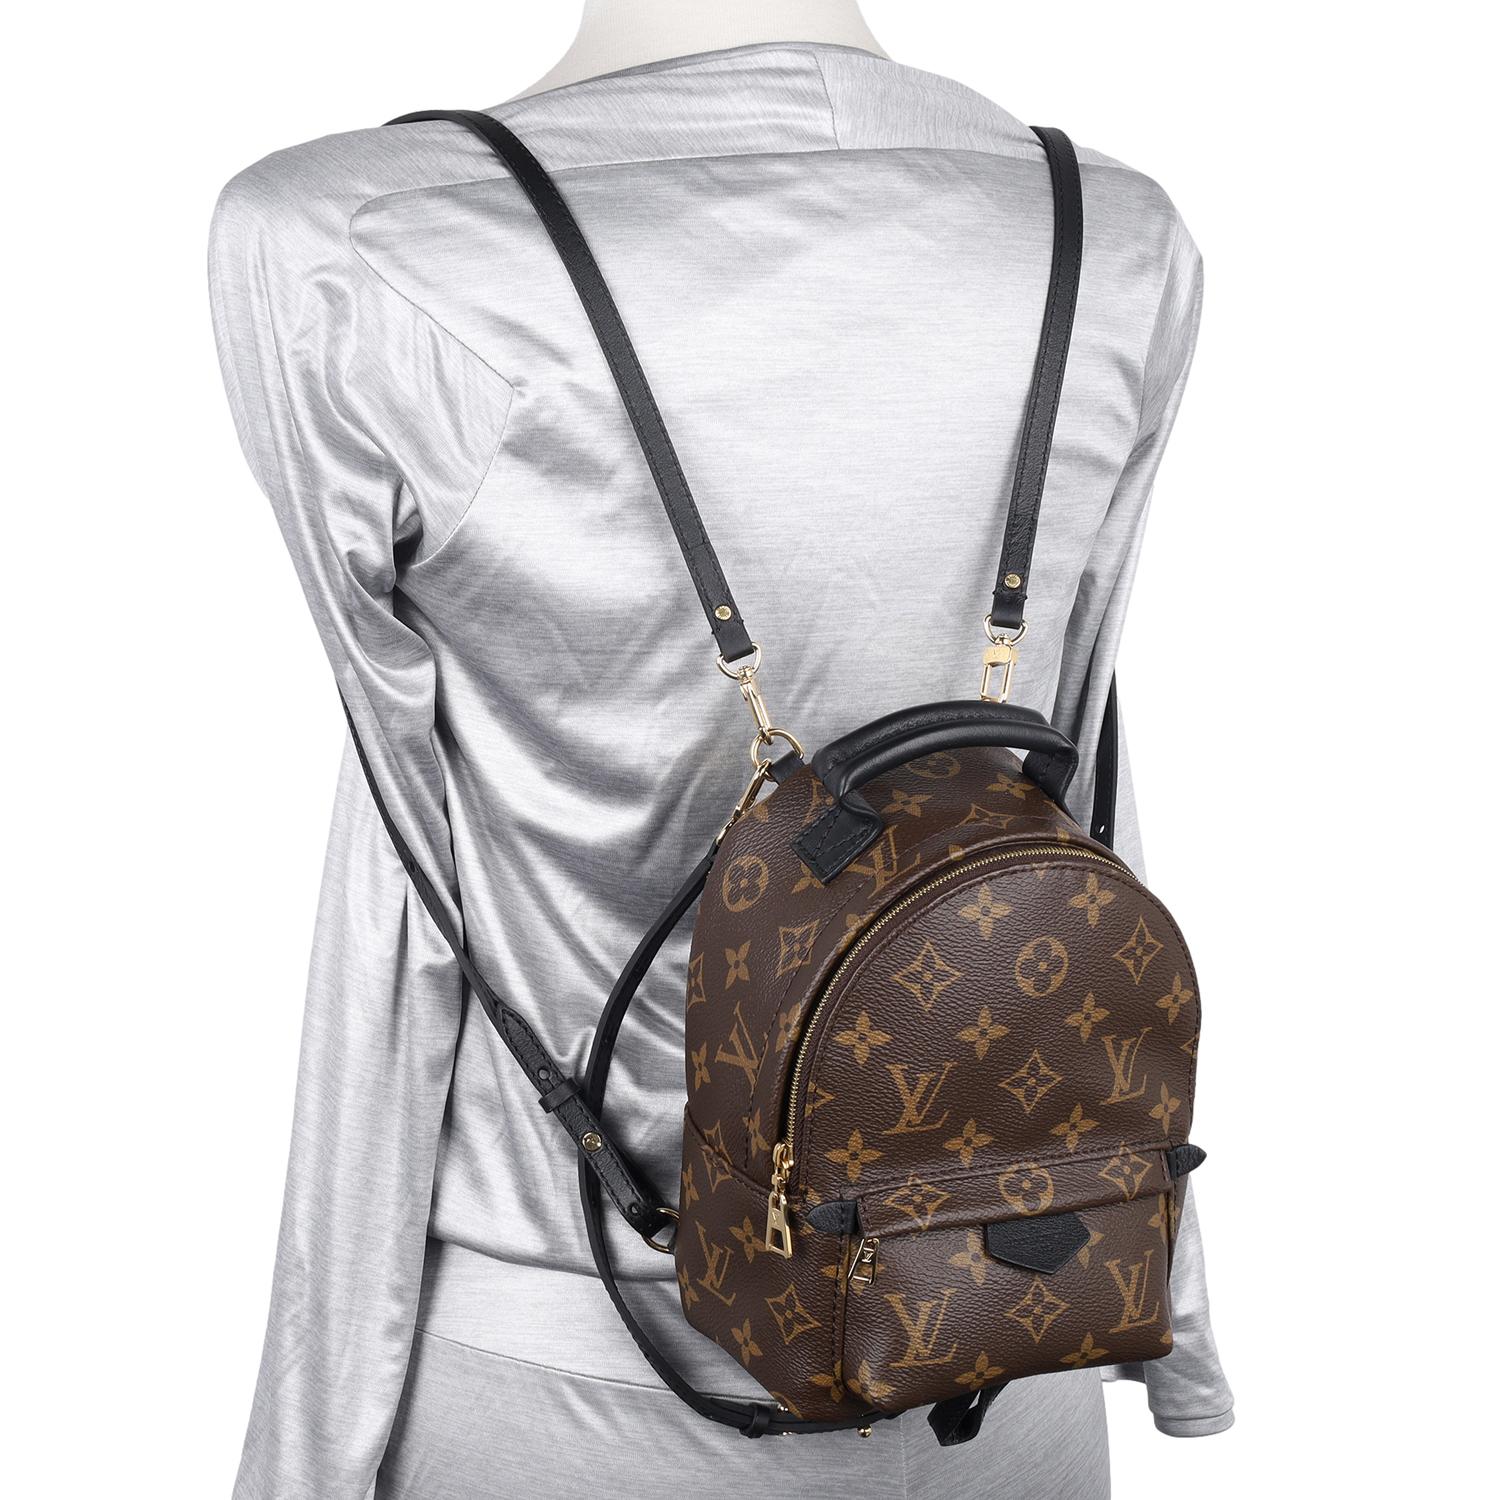 Authentic, pre-loved Louis Vuitton brown monogram Palm Springs Mini Backpack. This adorable backpack from LV can be worn as a shoulder bag, crossbody bag or as a backpack. Your going to love it! Features the iconic monogram print canvas with